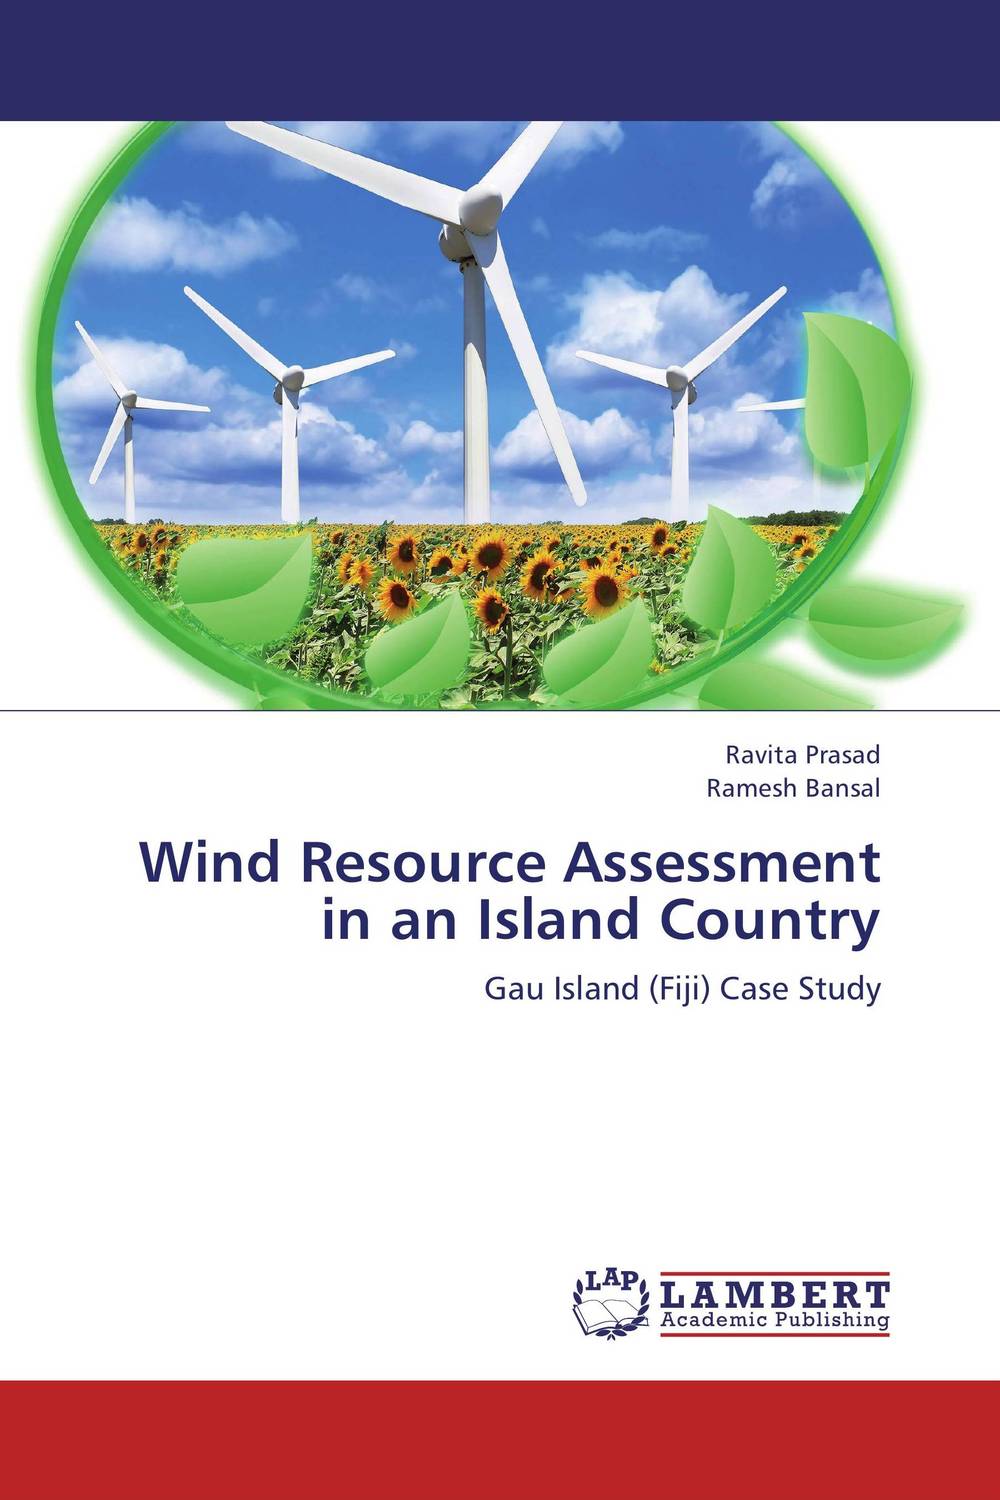 Wind Resource Assessment in an Island Country